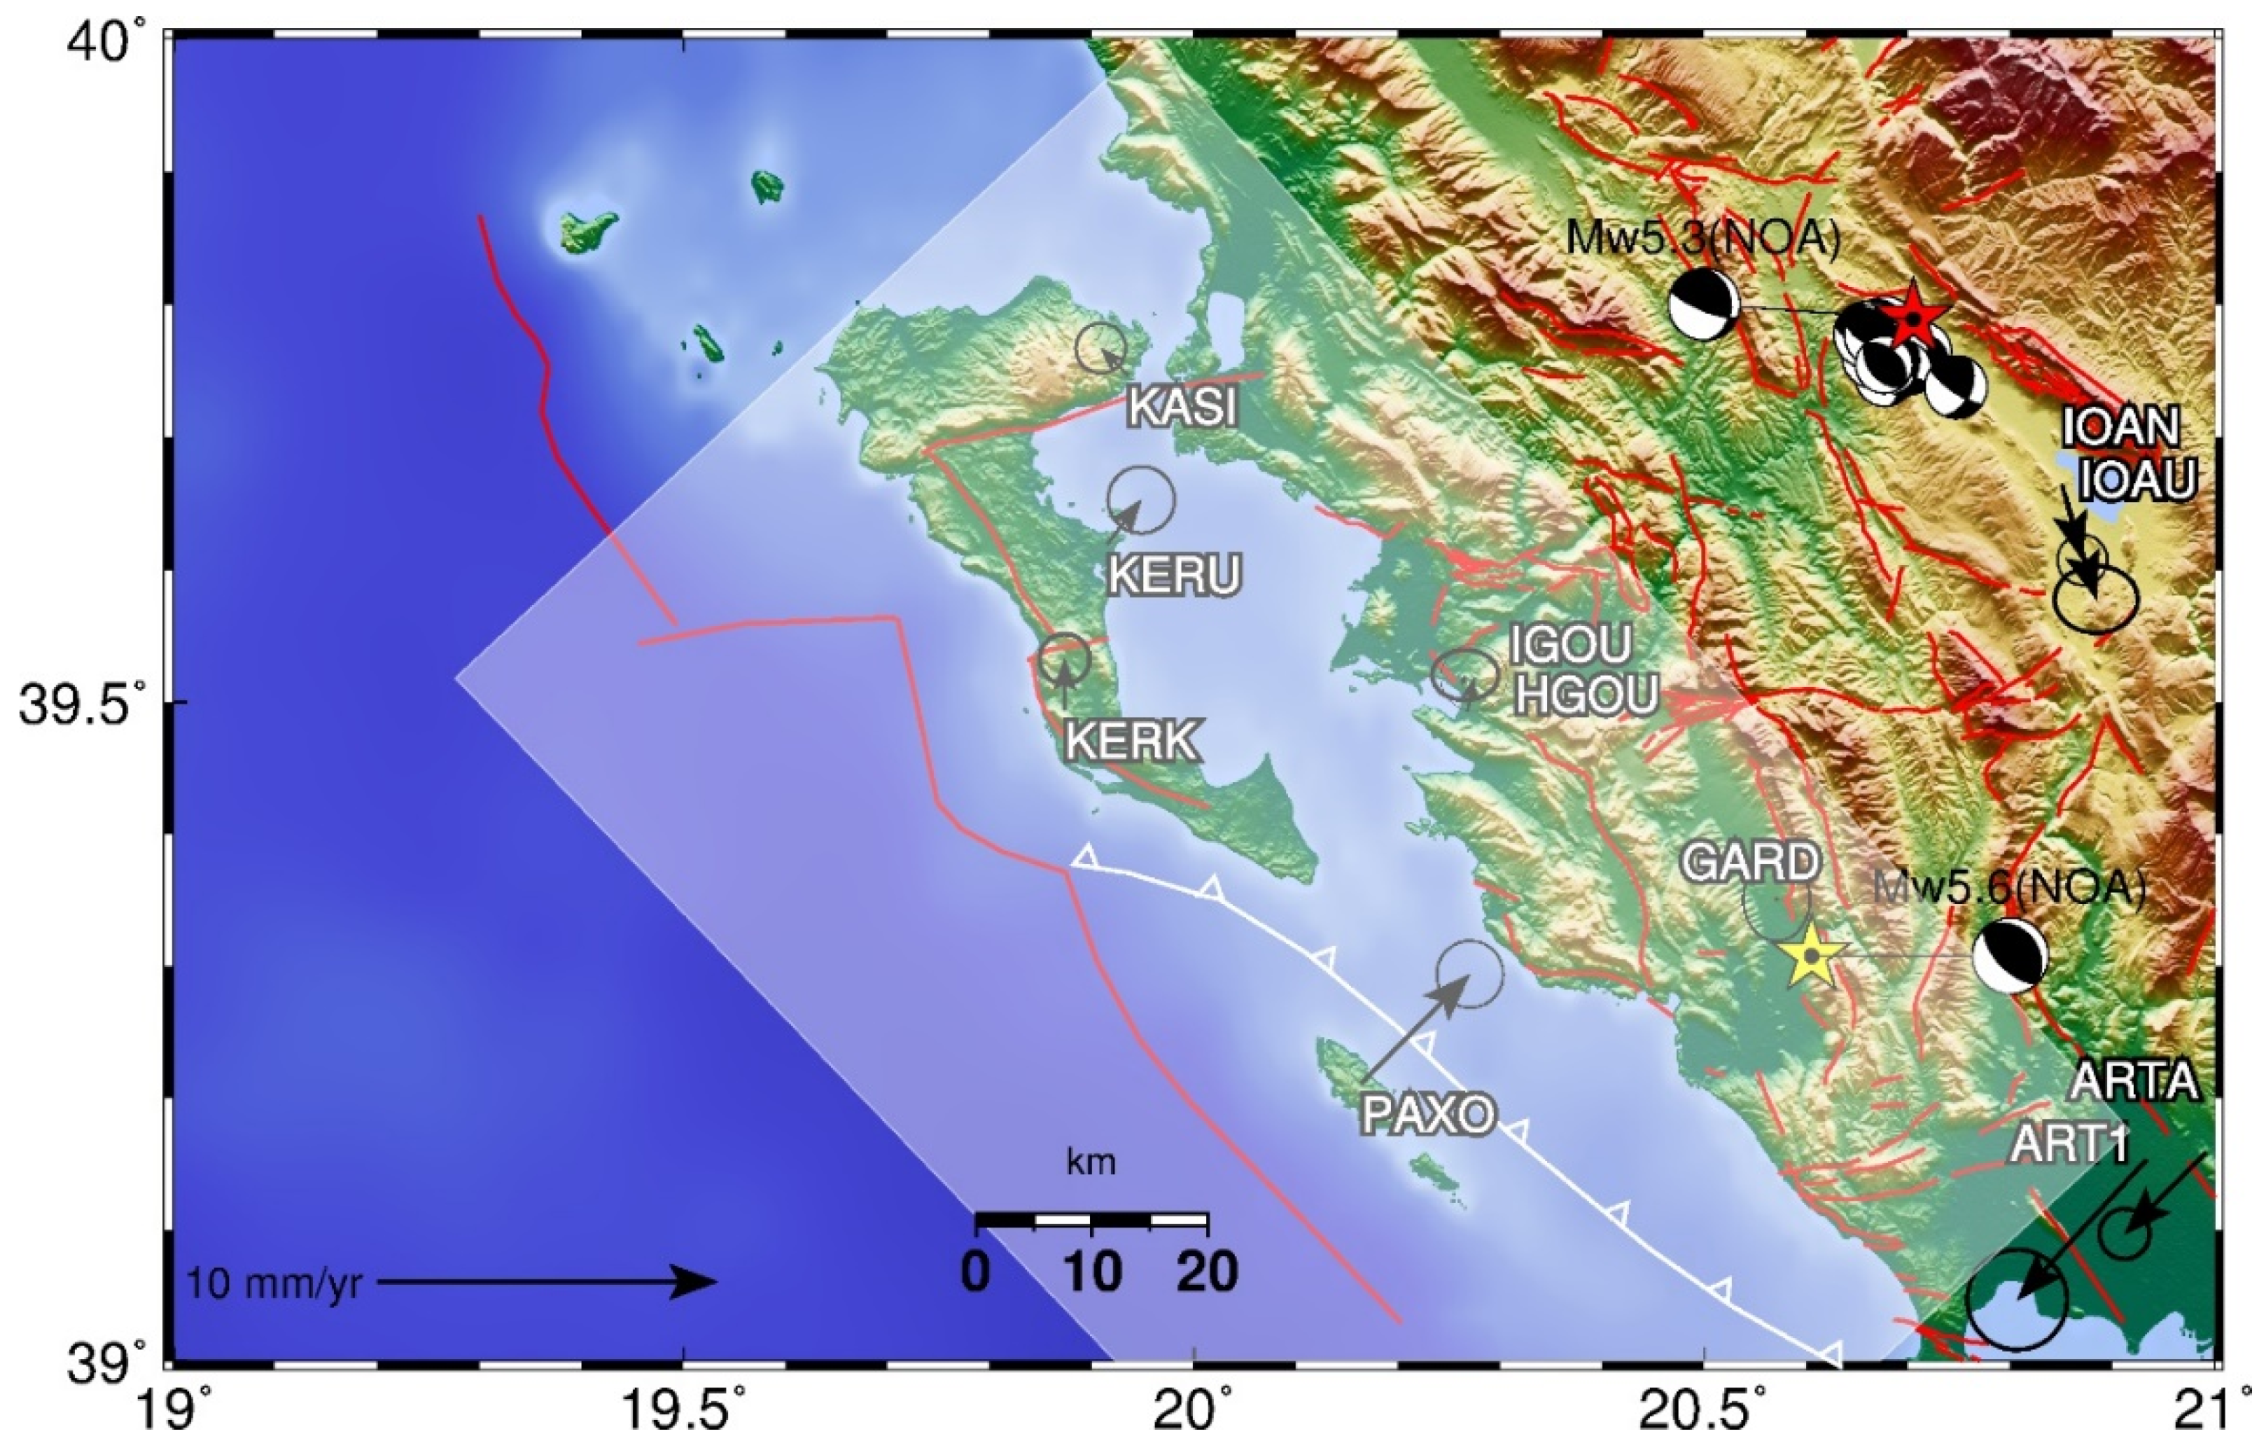 Geosciences | Free Full-Text | The Mw = 5.6 Kanallaki Earthquake of 21  March 2020 in West Epirus, Greece: Reverse Fault Model from InSAR Data and  Seismotectonic Implications for Apulia-Eurasia Collision | HTML